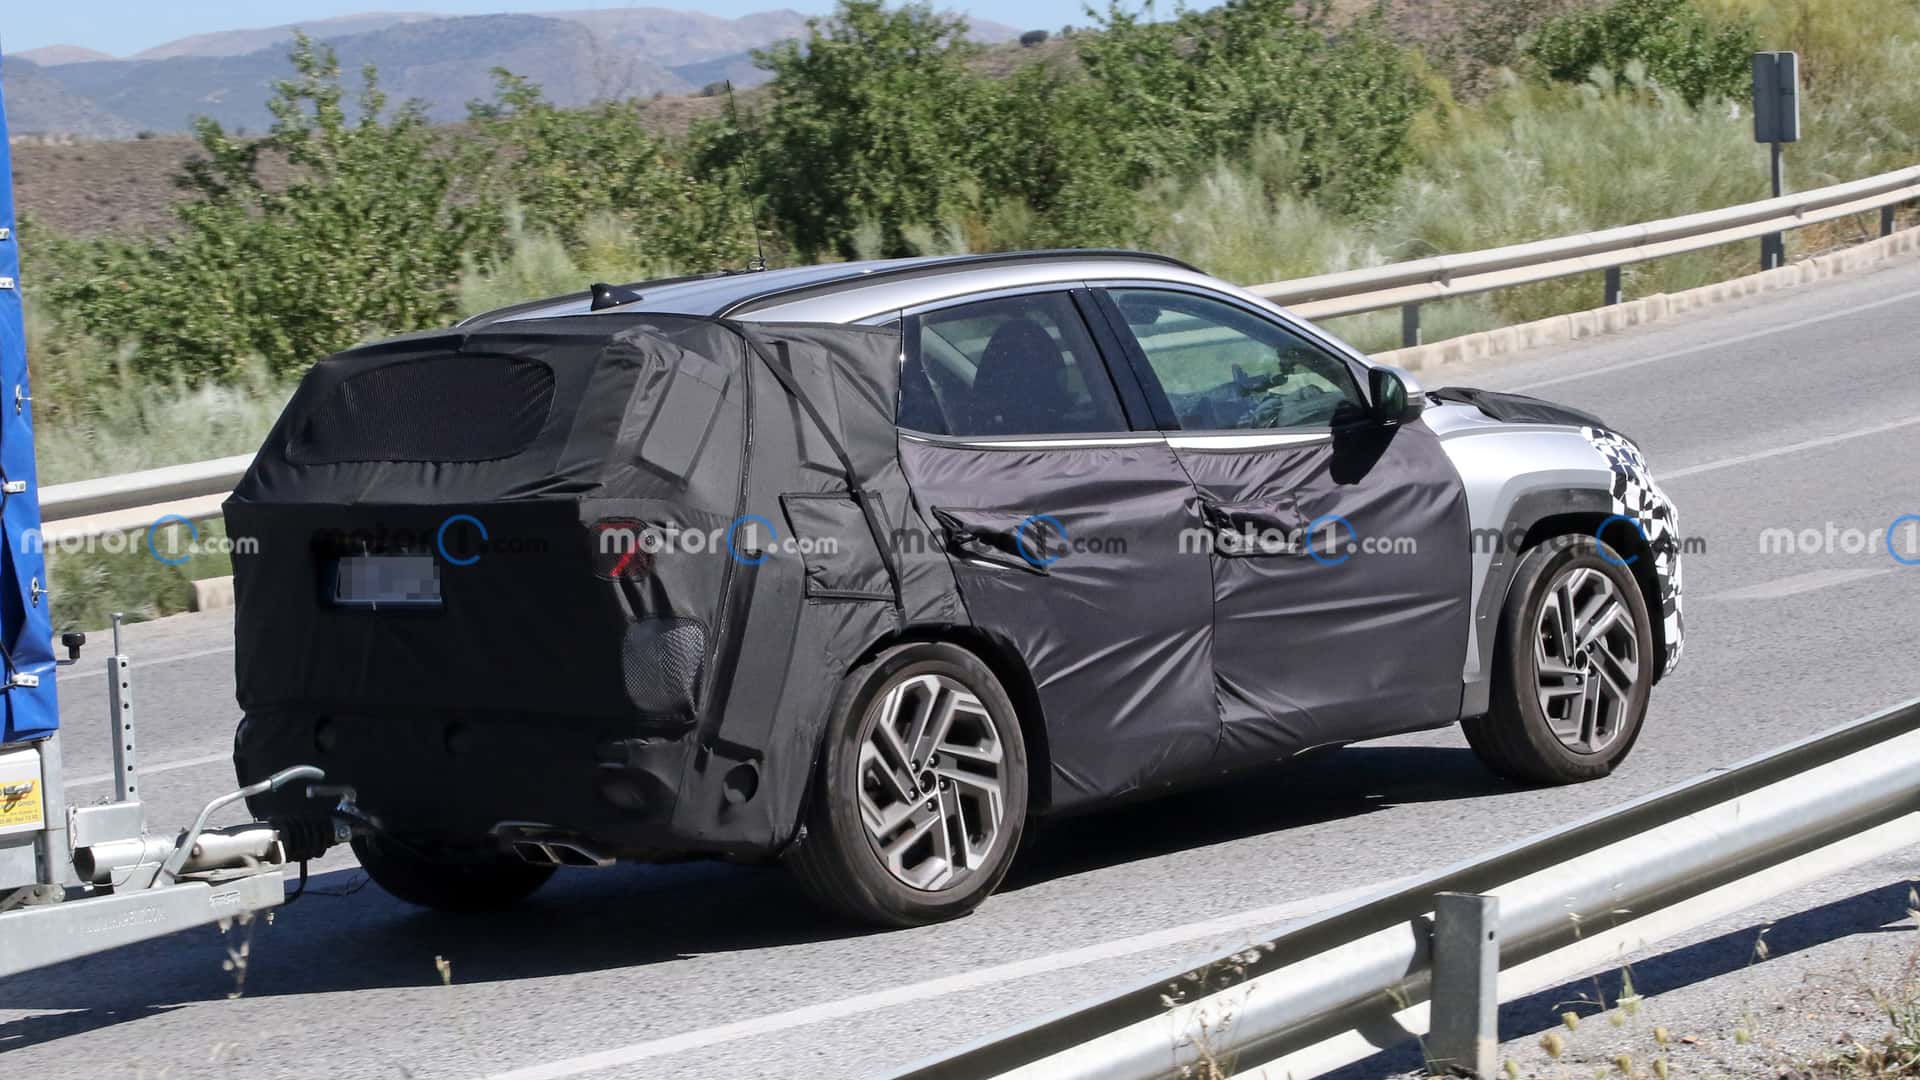 Hyundai Tucson Facelift spotted on test drive, promising to be launched soon hyundai-tucson-facelift-side-view-spy-photo-1.jpg